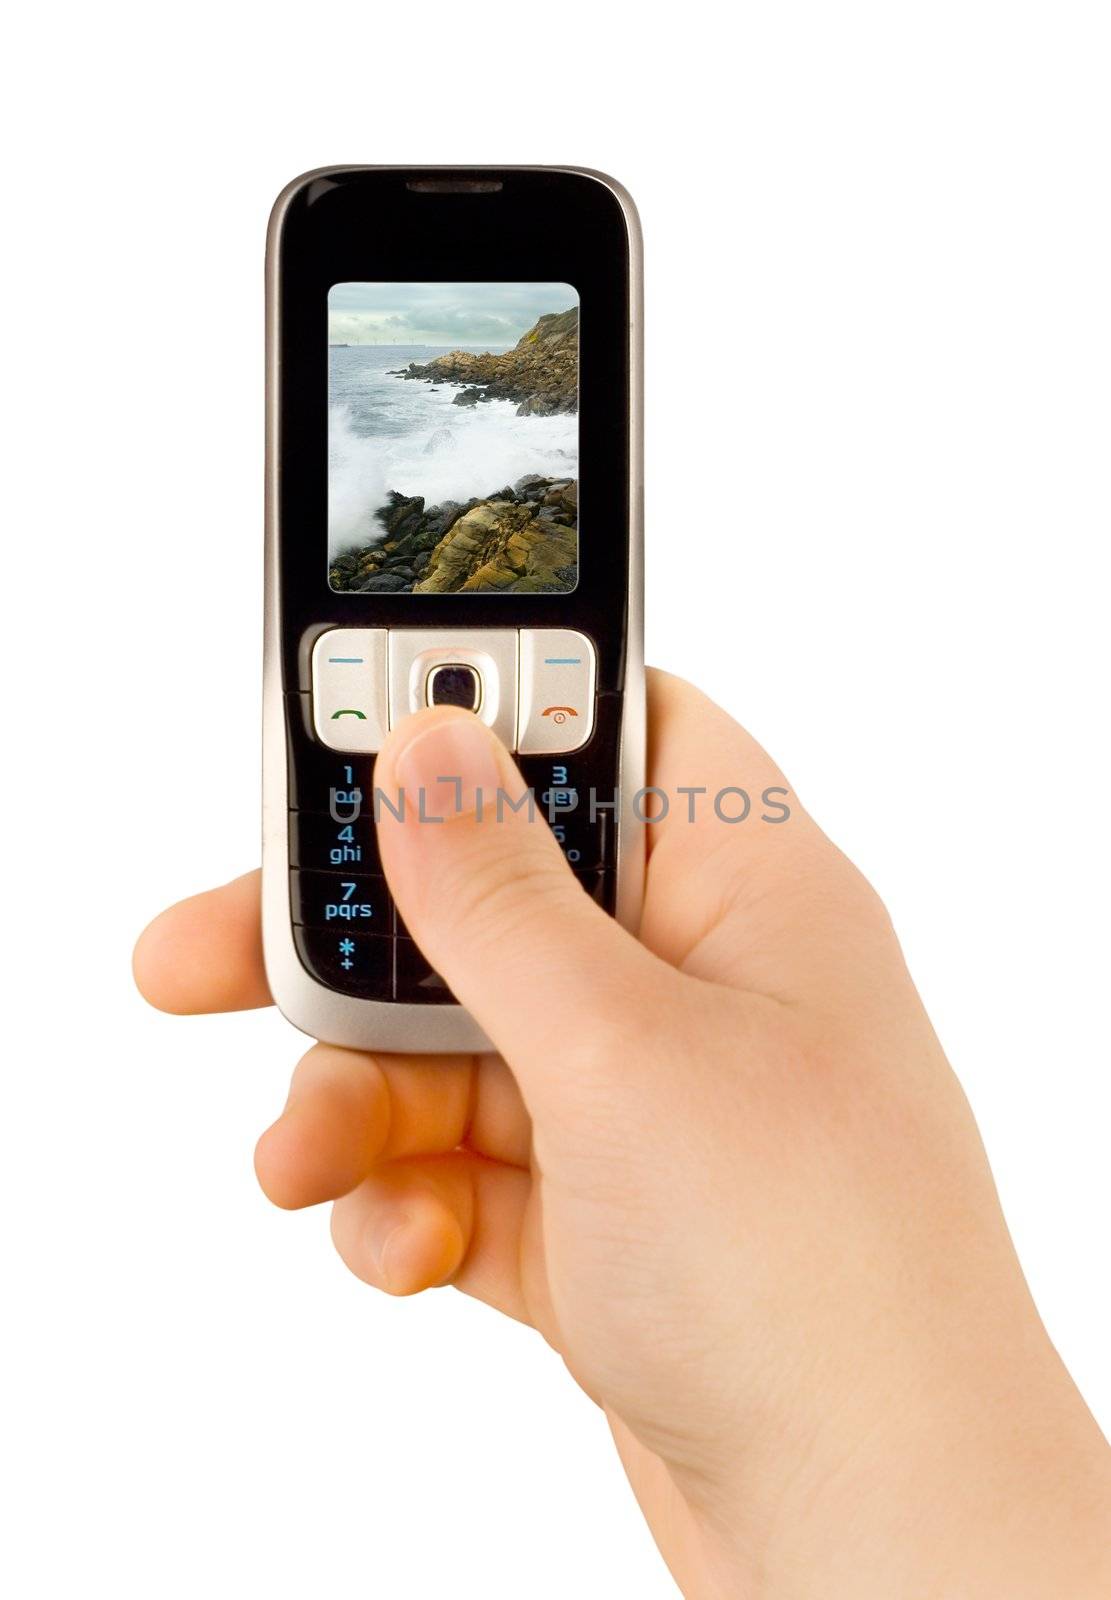 a technology cellular phone holding in a human hand